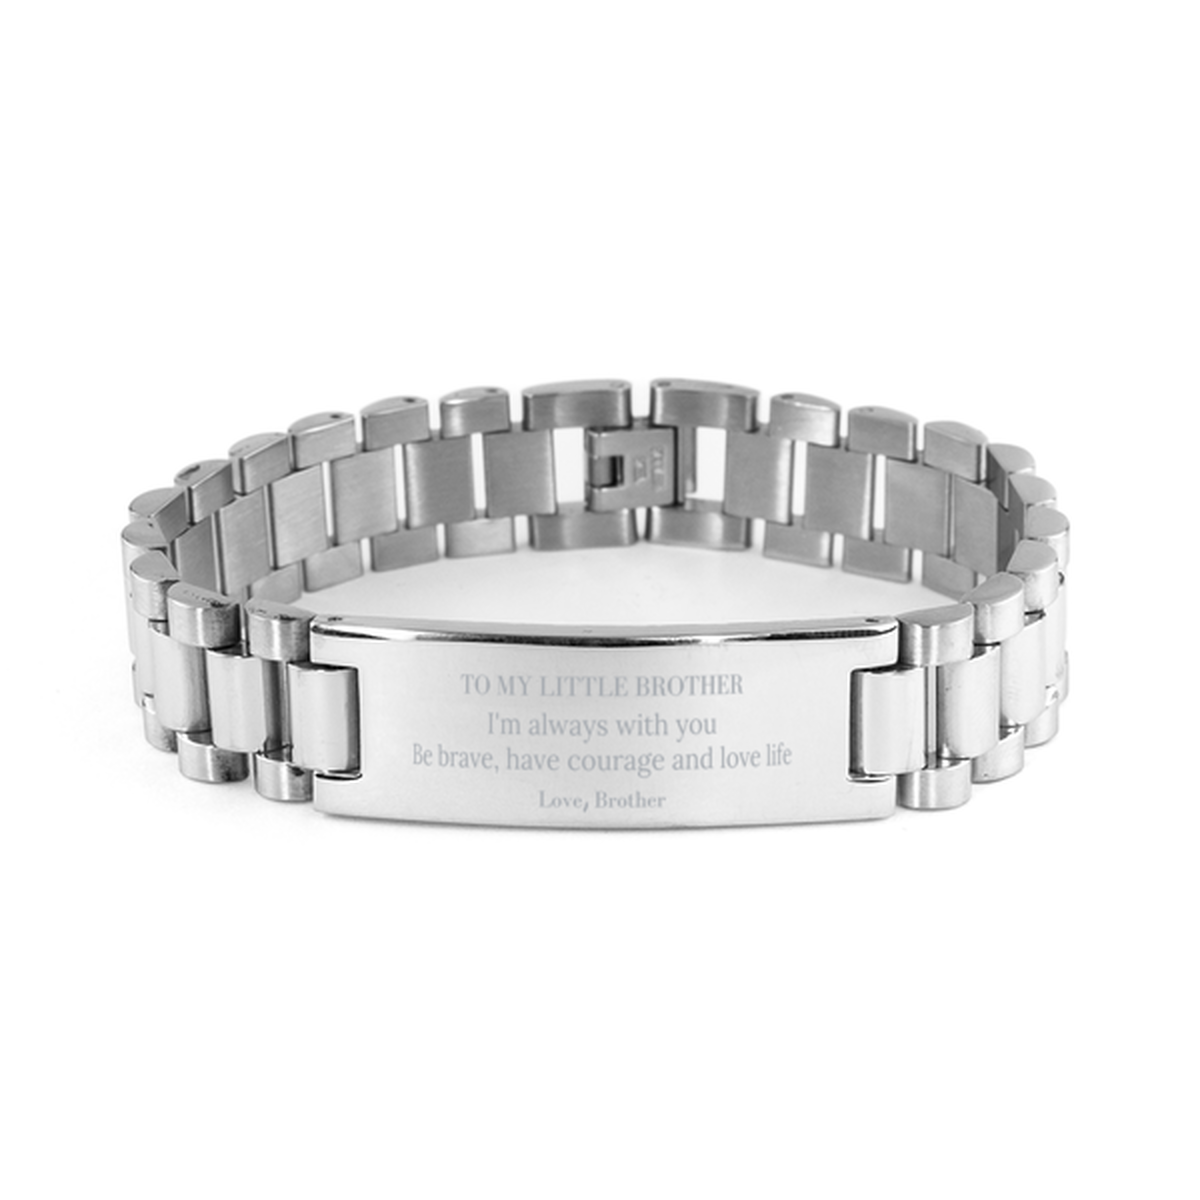 To My Little Brother Gifts from Brother, Unique Ladder Stainless Steel Bracelet Inspirational Christmas Birthday Graduation Gifts for Little Brother I'm always with you. Be brave, have courage and love life. Love, Brother